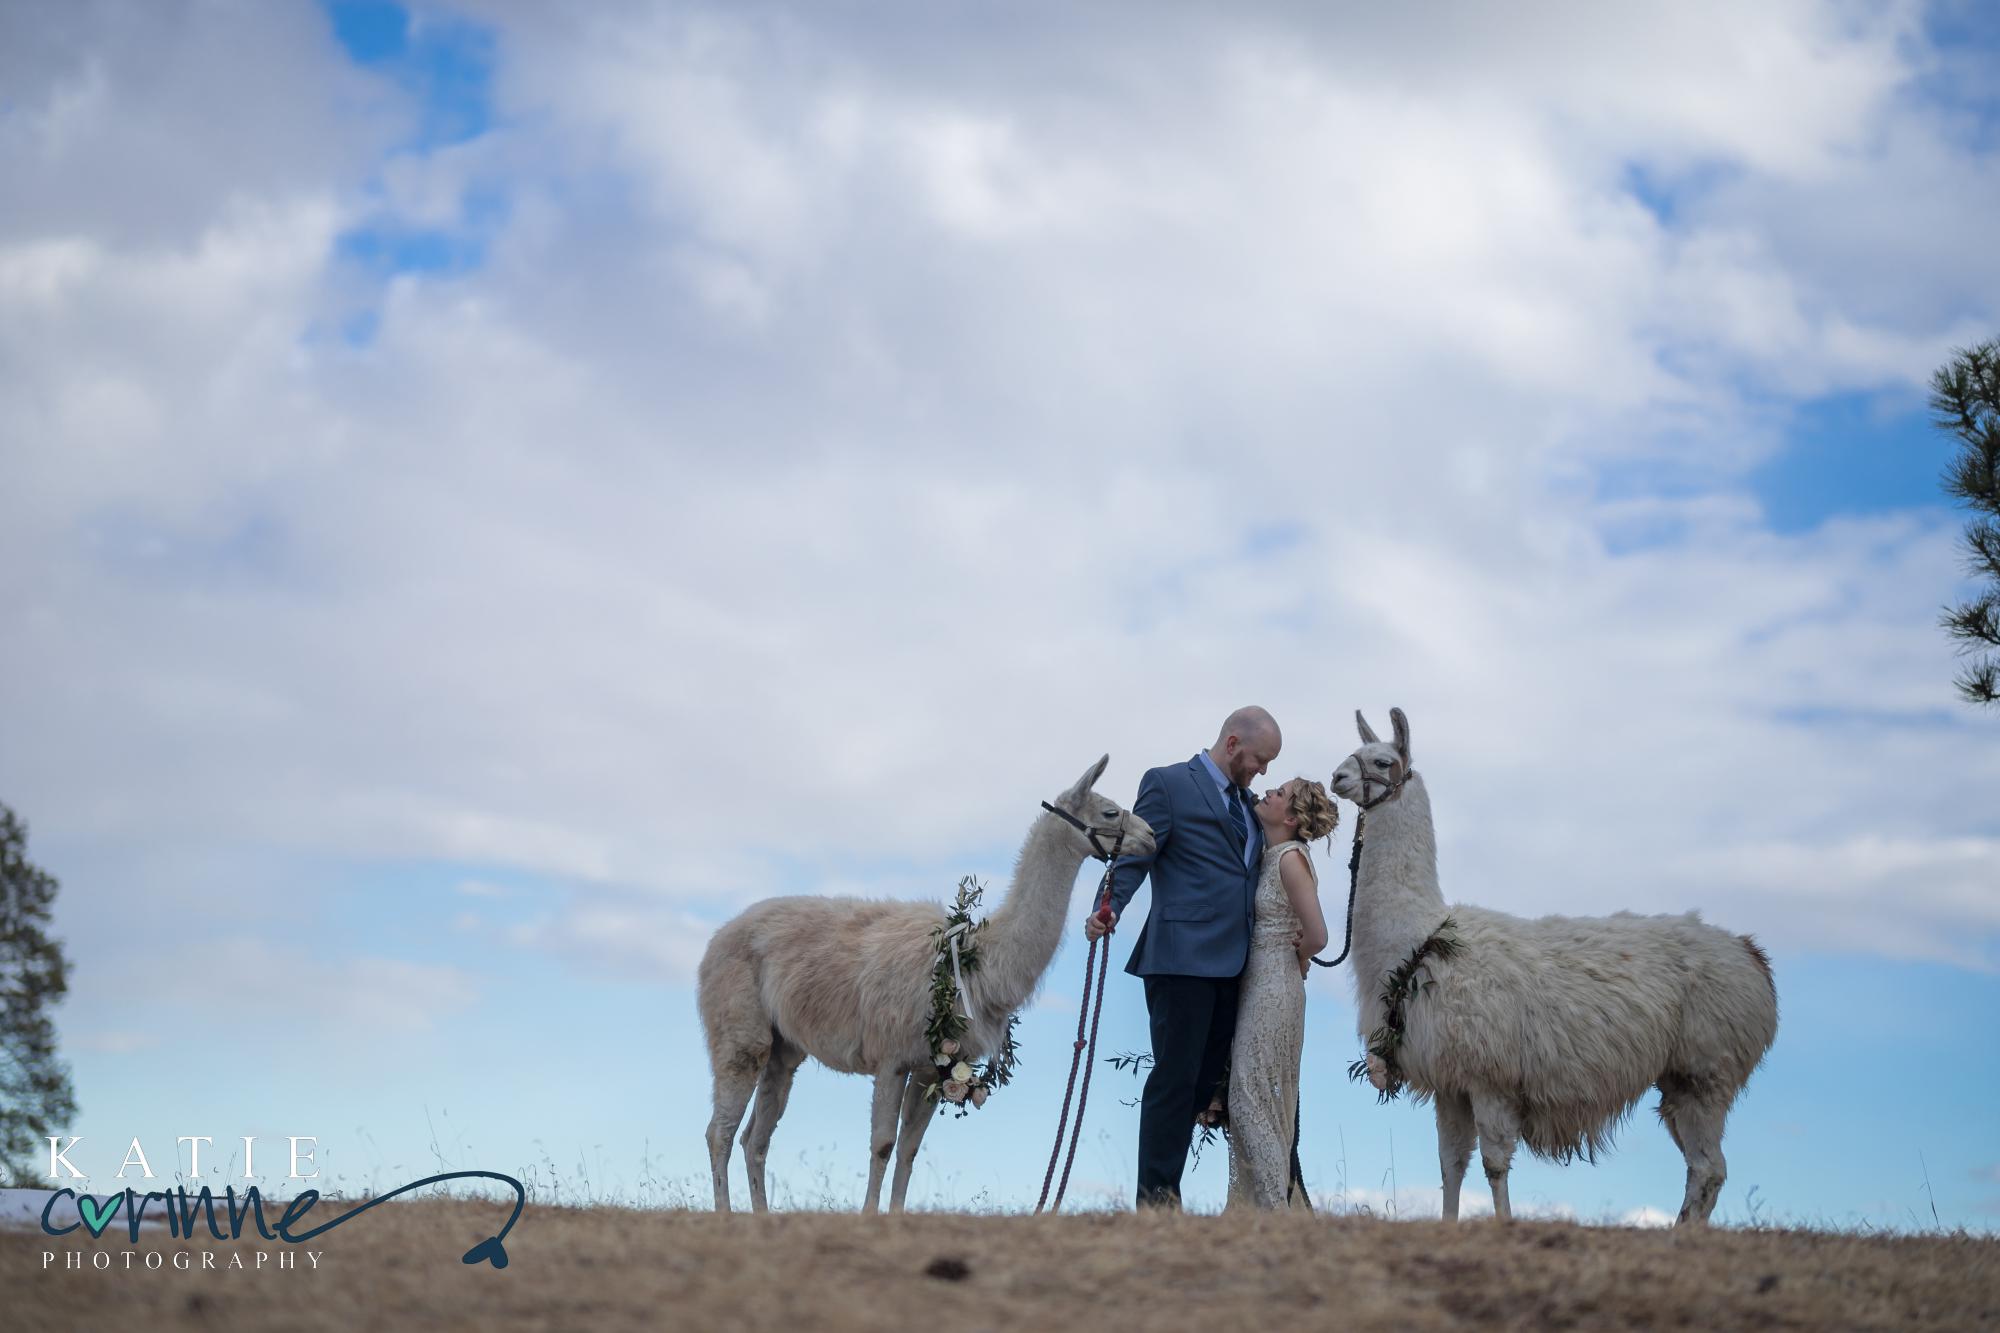 Wedding couple and llamas on hill with blue sky as background